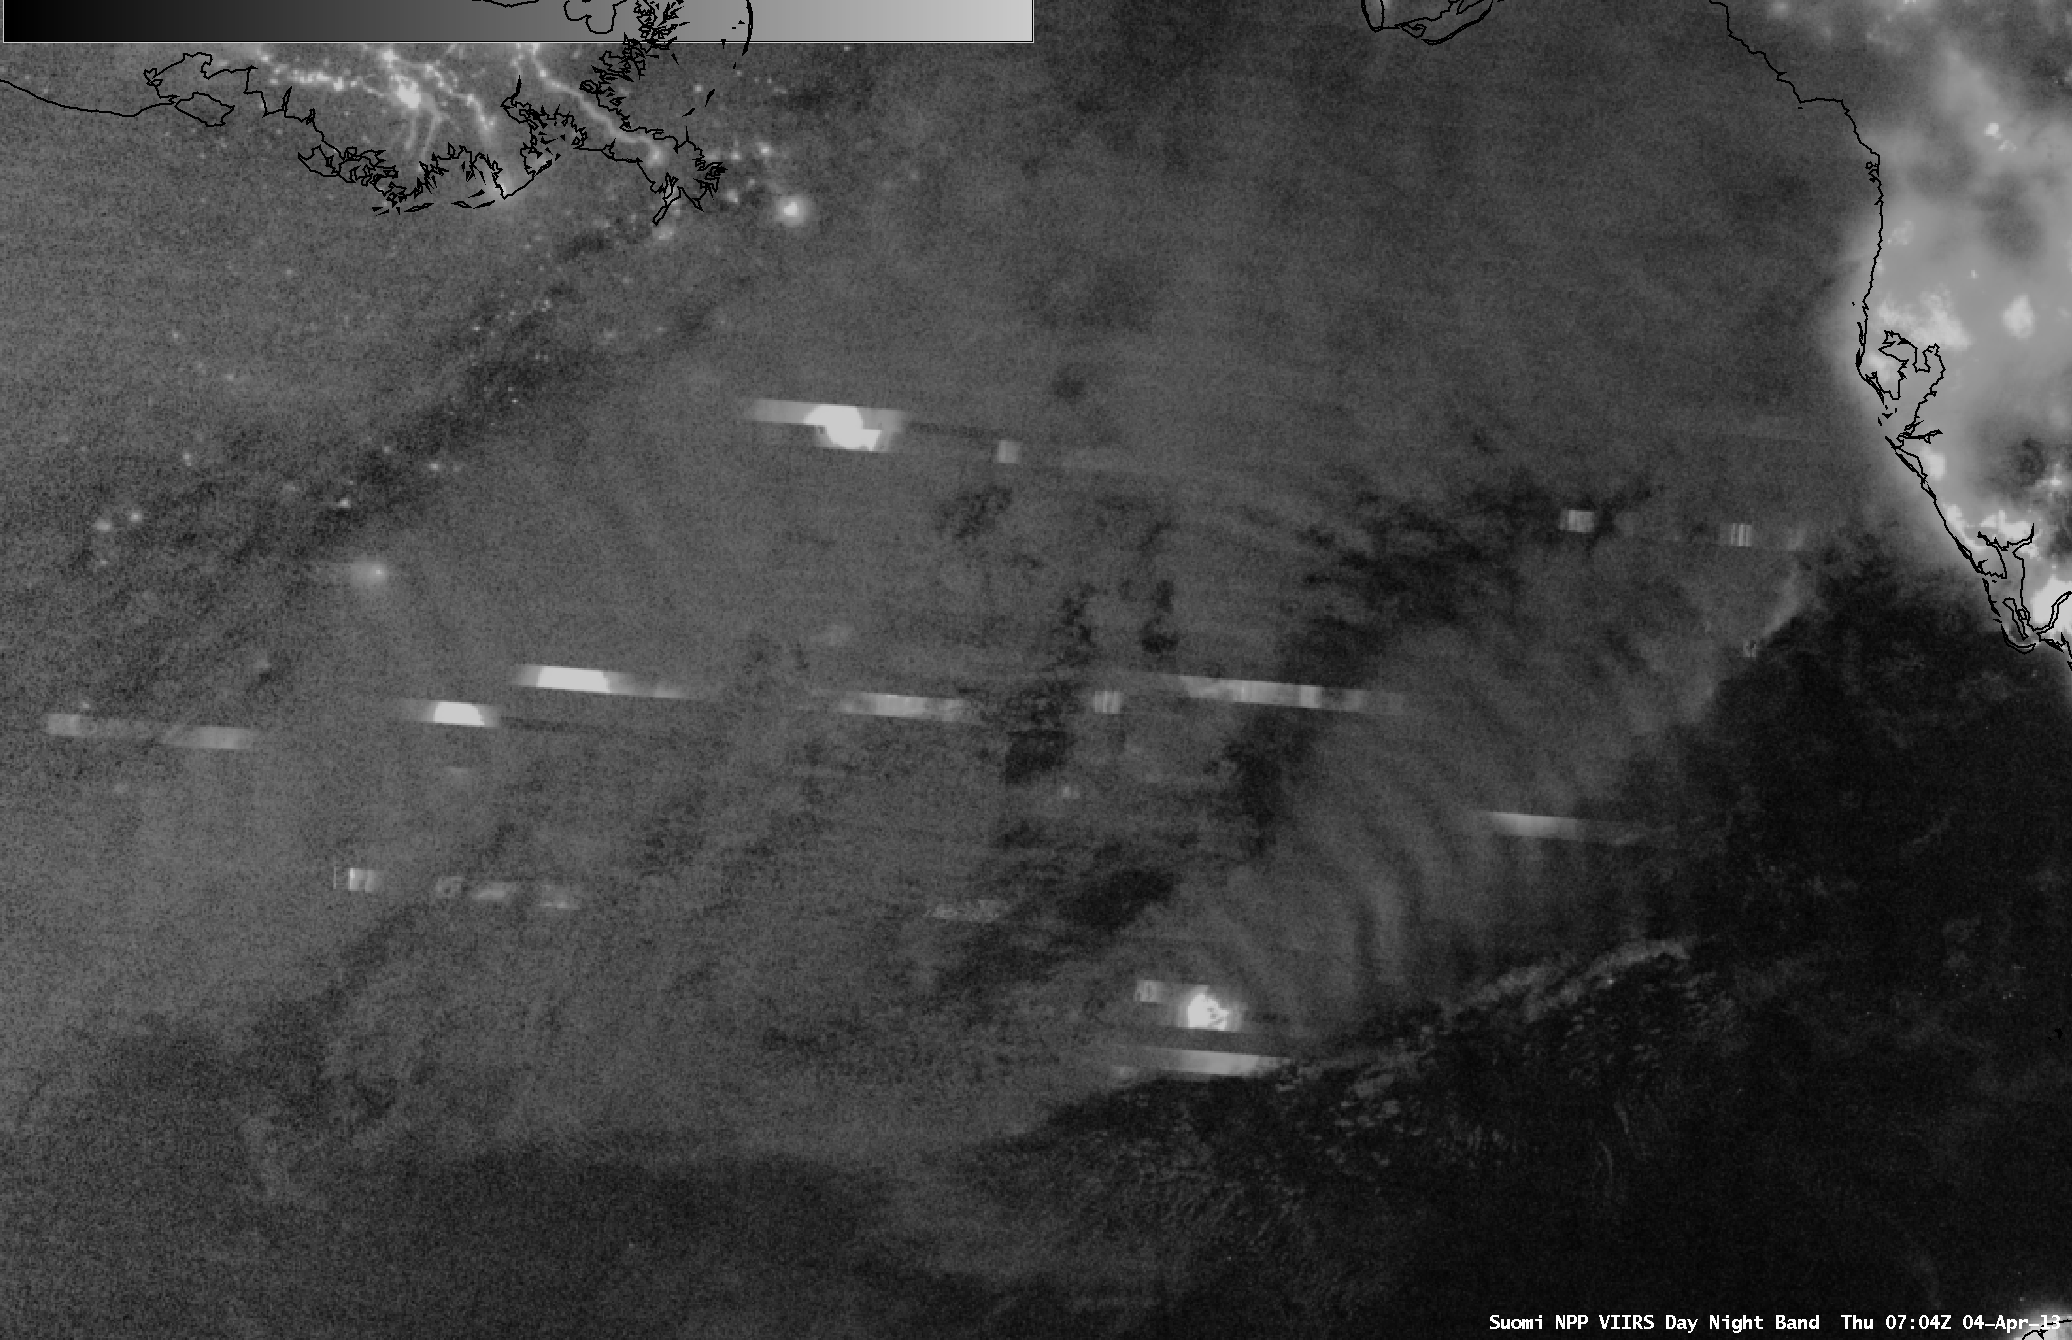 Suomi NPP VIIRS 0.7 Âµm Day/Night Band and 11.45 Âµm IR channel images